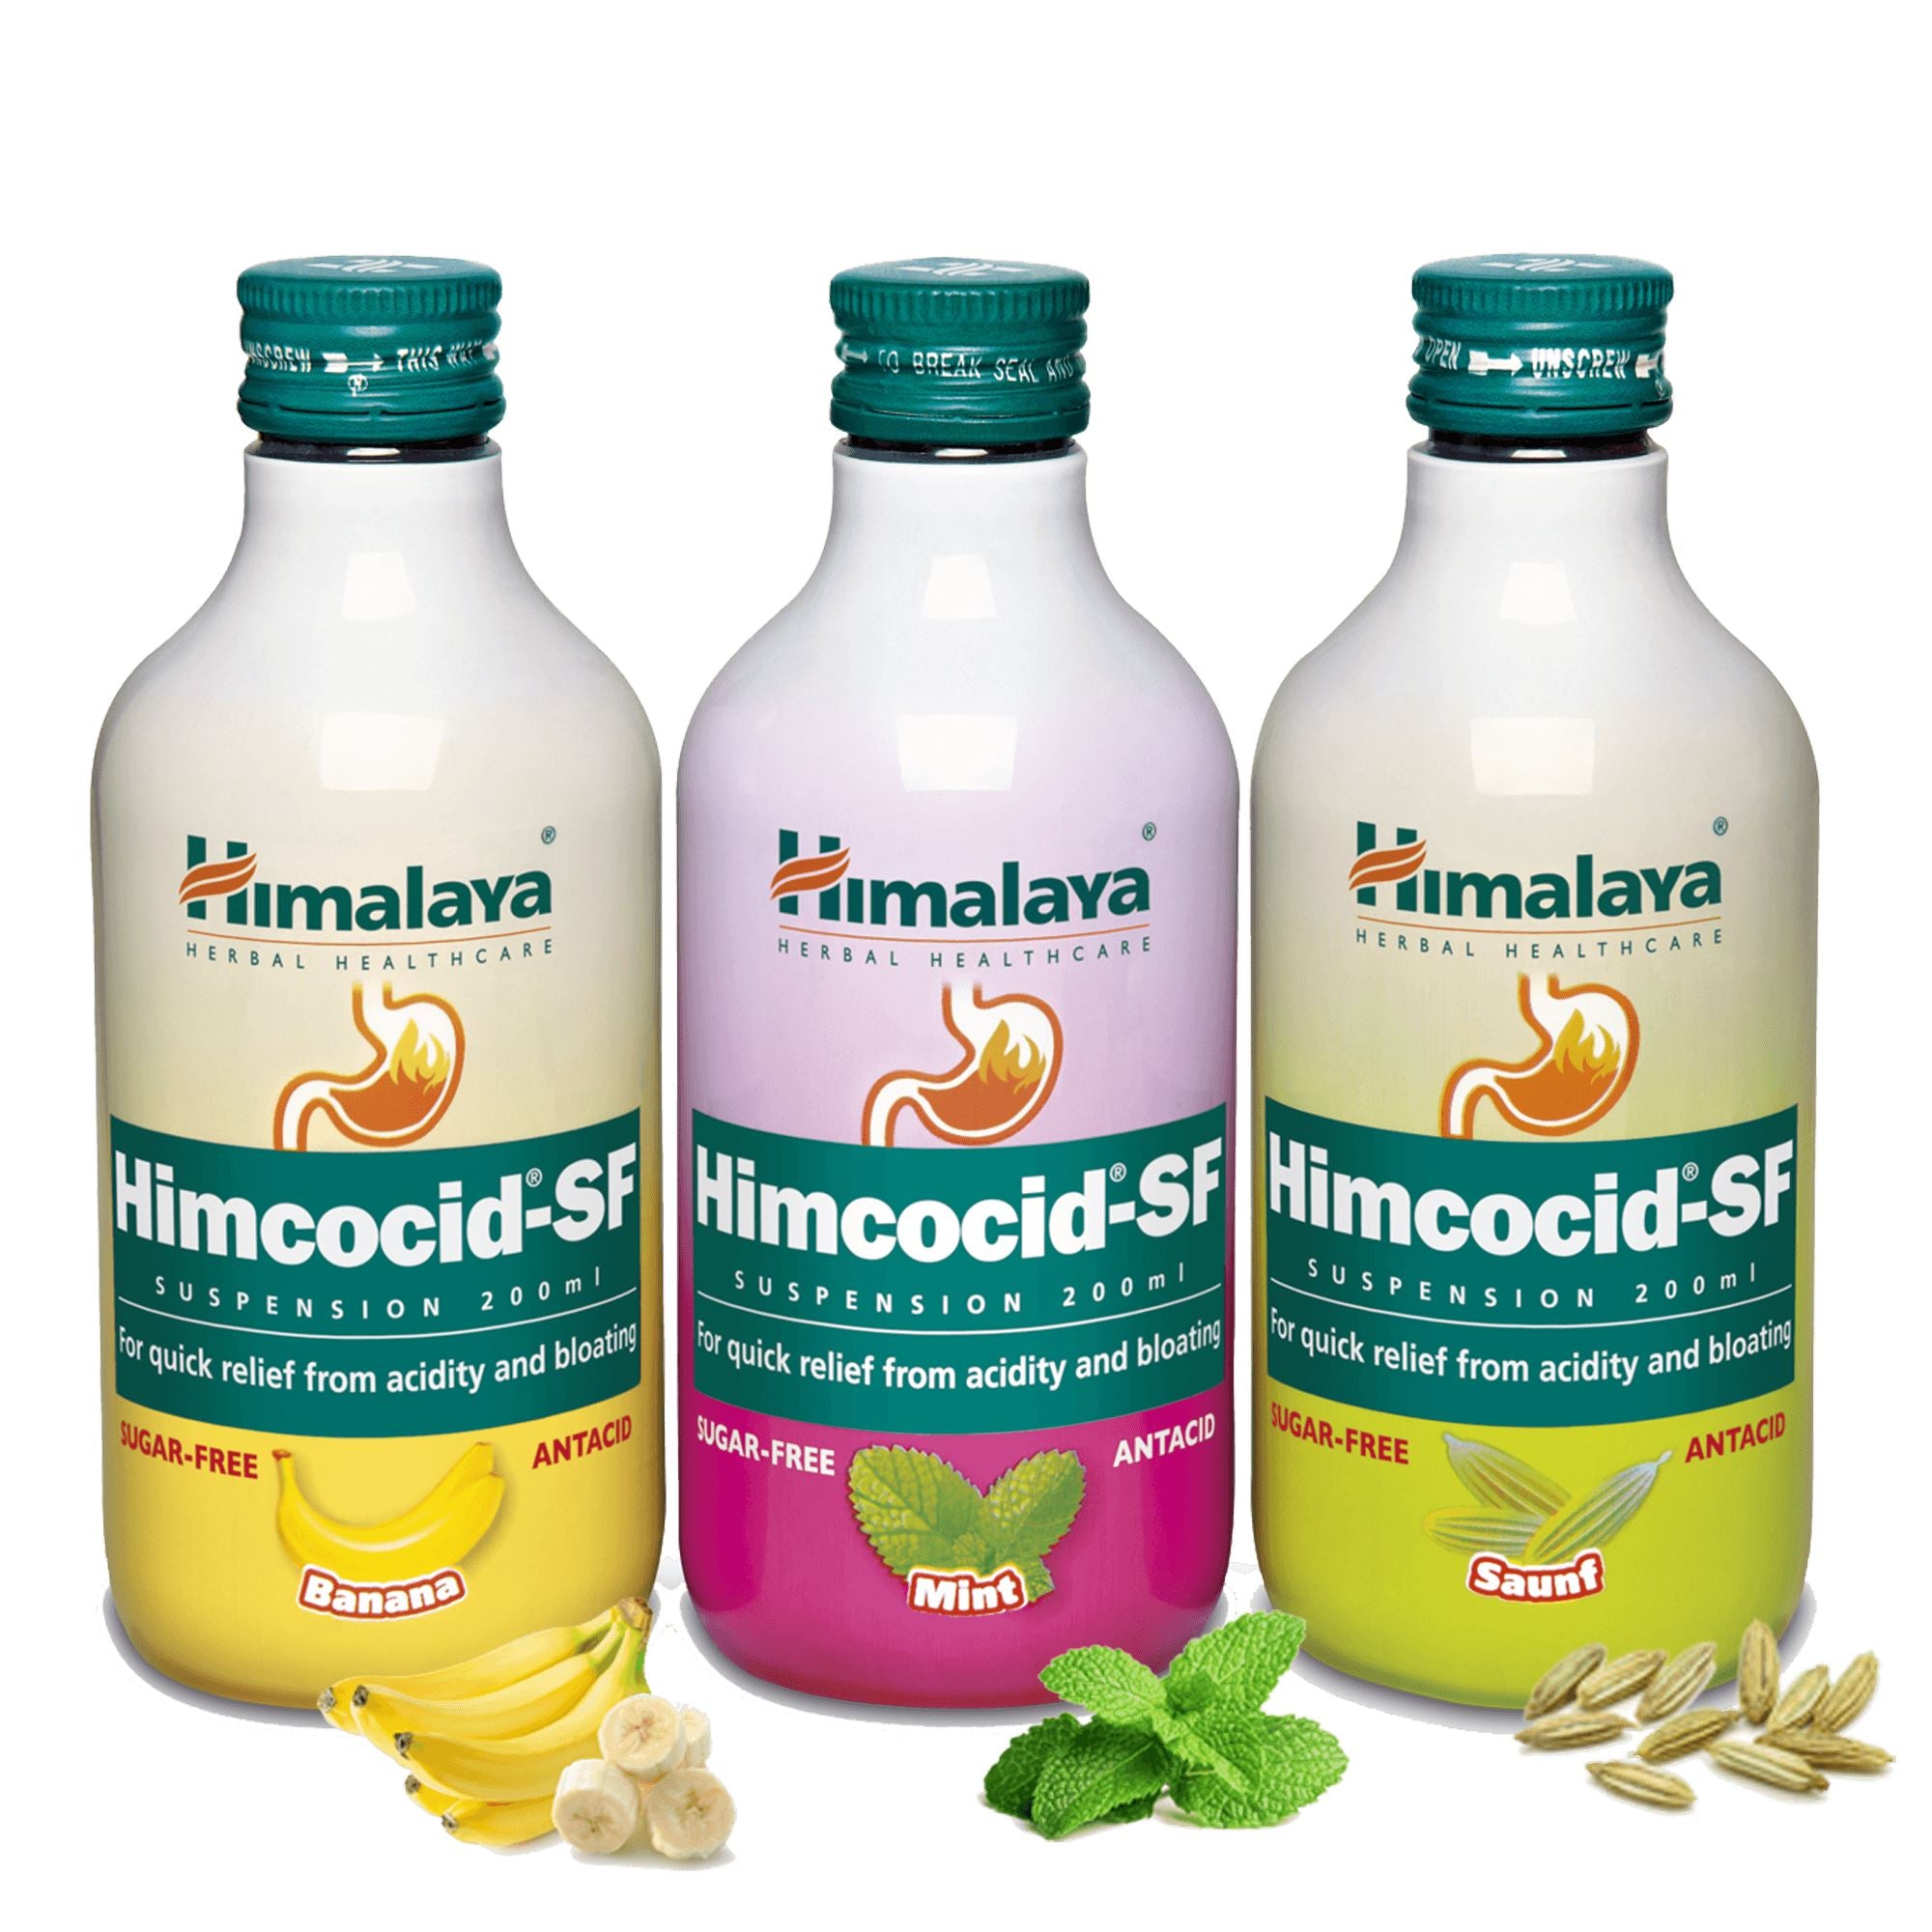 Himalaya Himcocid-SF - Syrup for quick relief from acidity and bloating